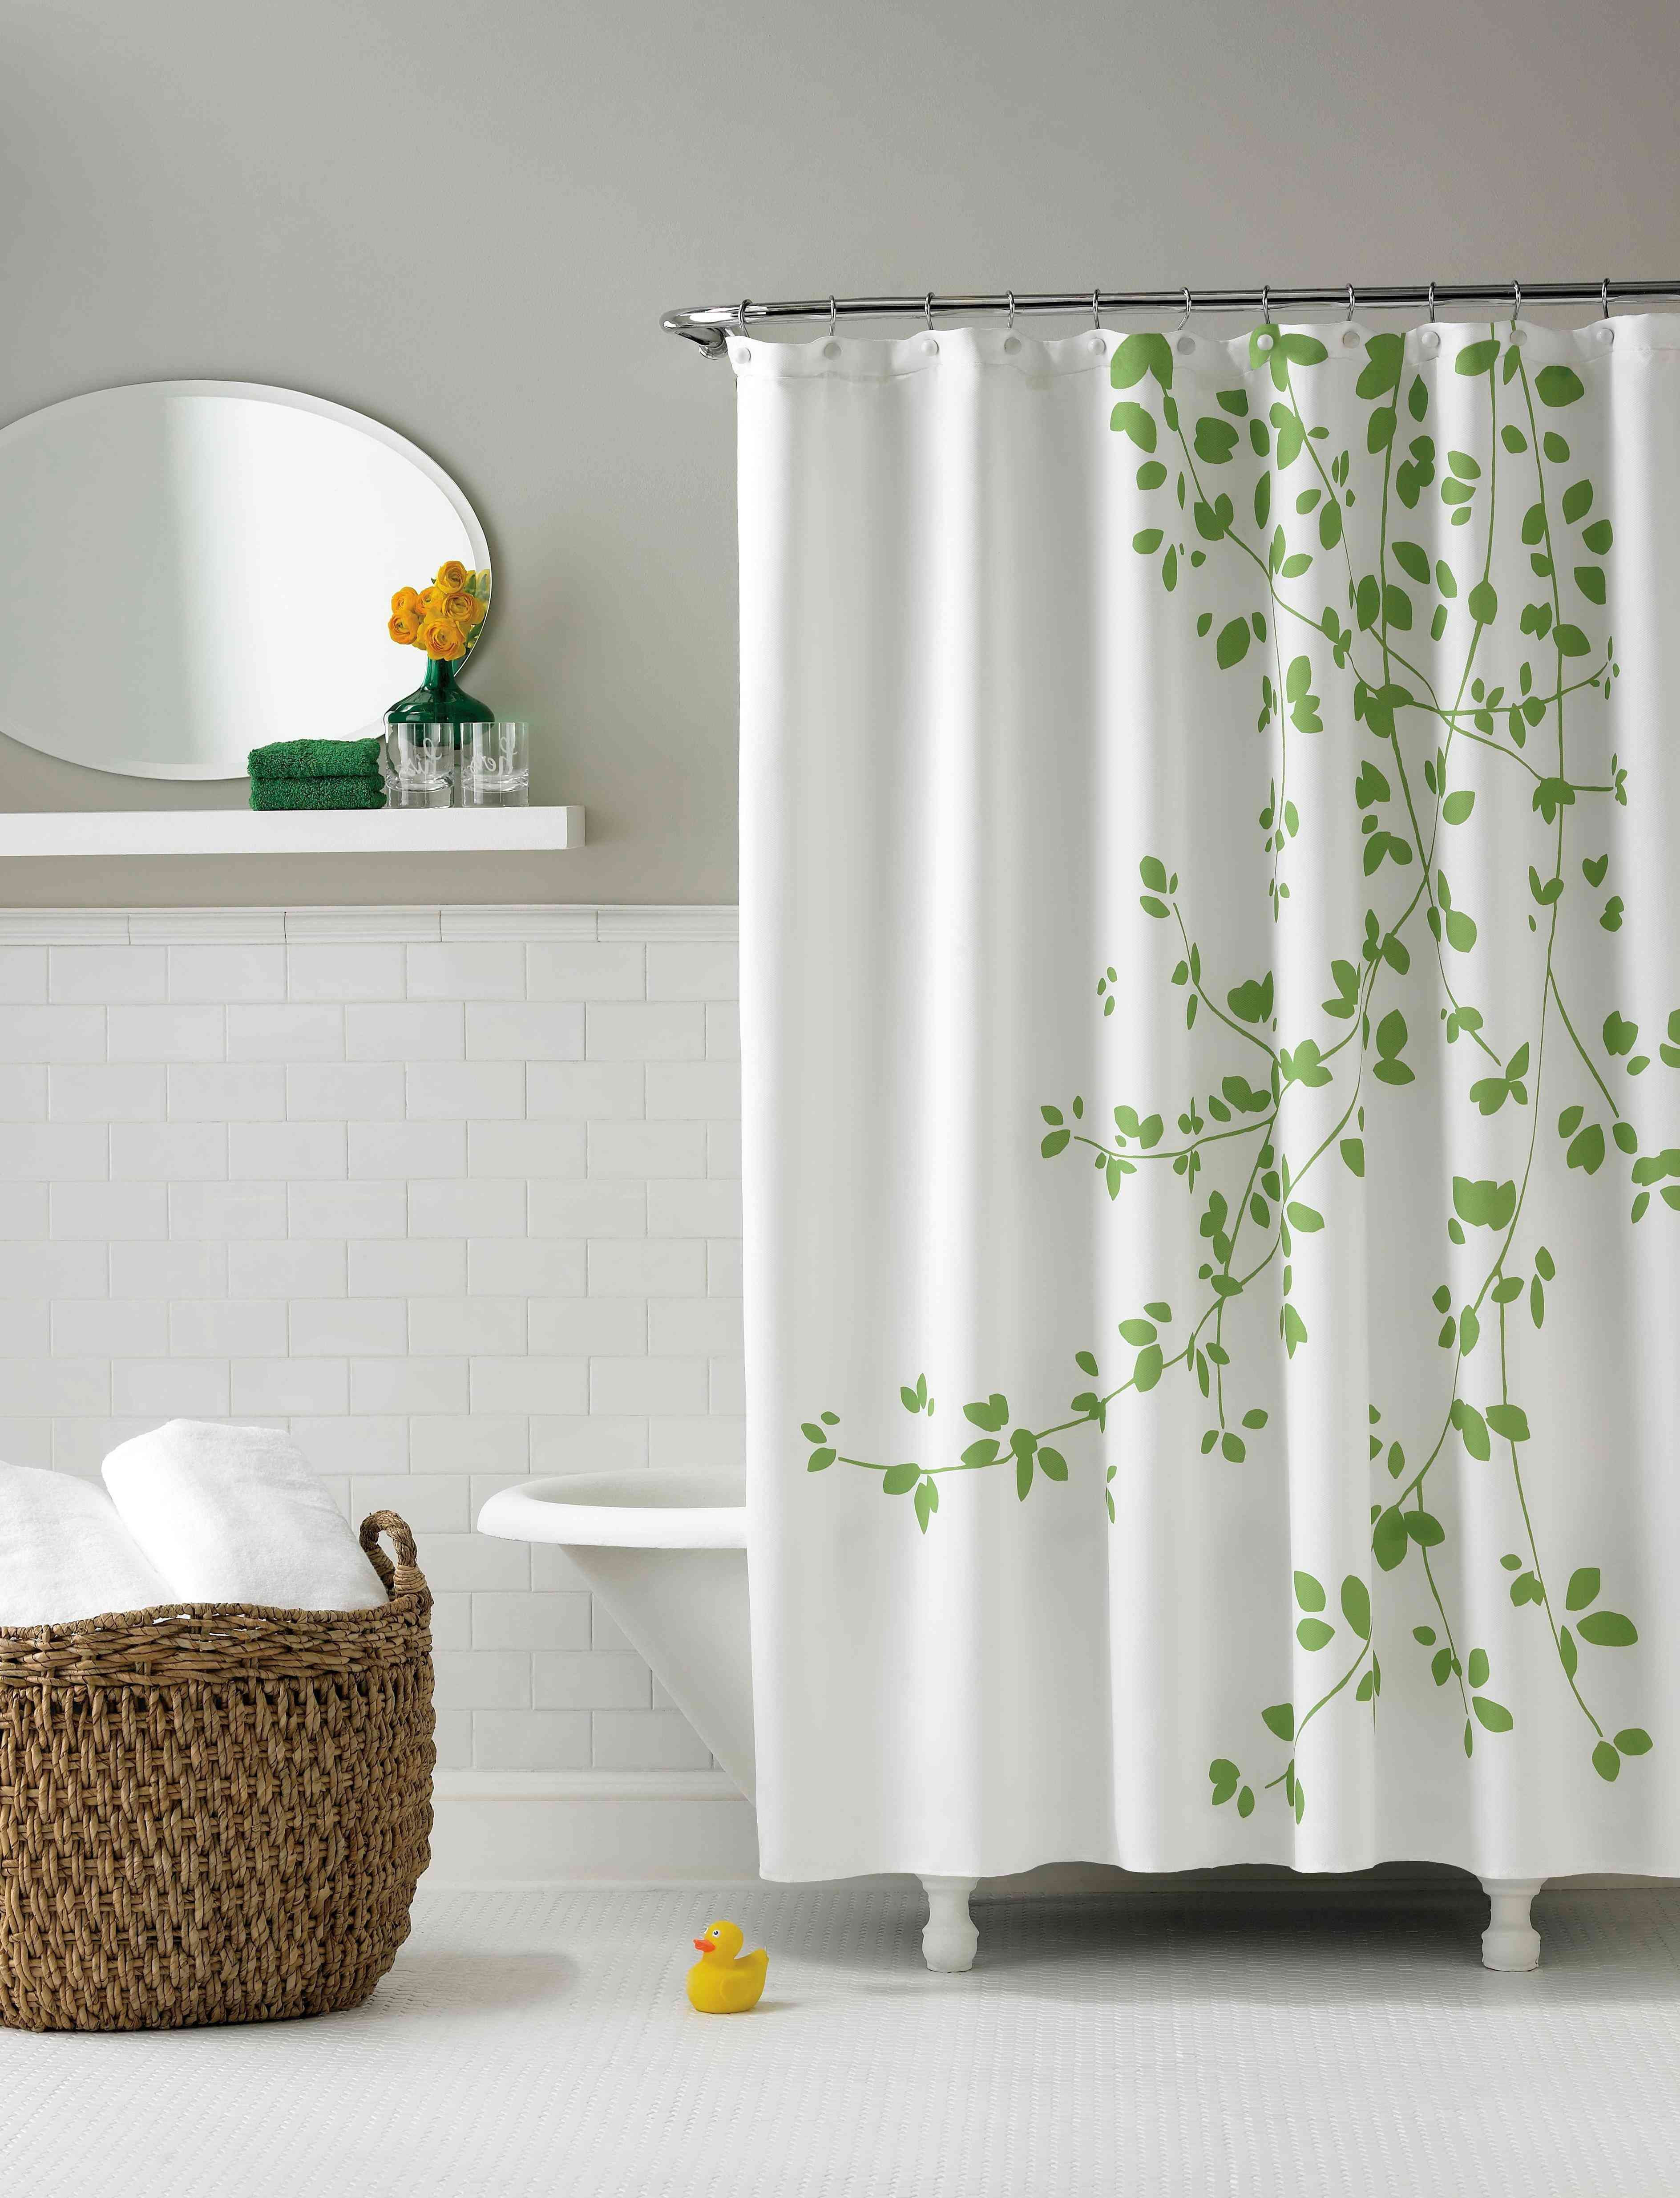 27 Stunning Plastic Square Vase 2022 free download plastic square vase of 27 fresh plastic floral liners shower curtains ideas design in plastic shower liner ideas dandelion shower curtain best furniture high end shower curtains elegant dill